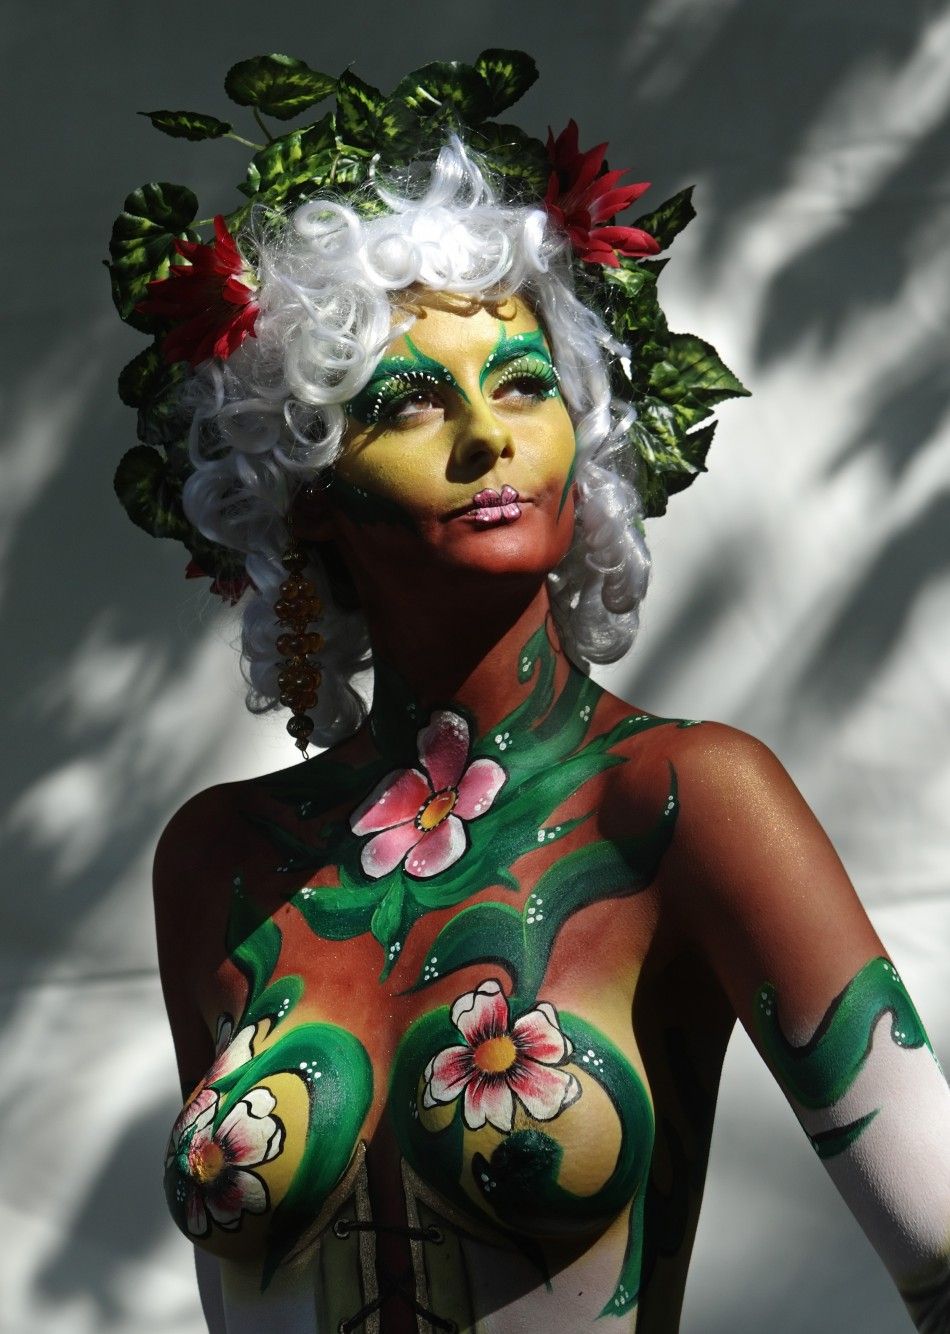 A model poses during the annual World Bodypainting Festival in Poertschach